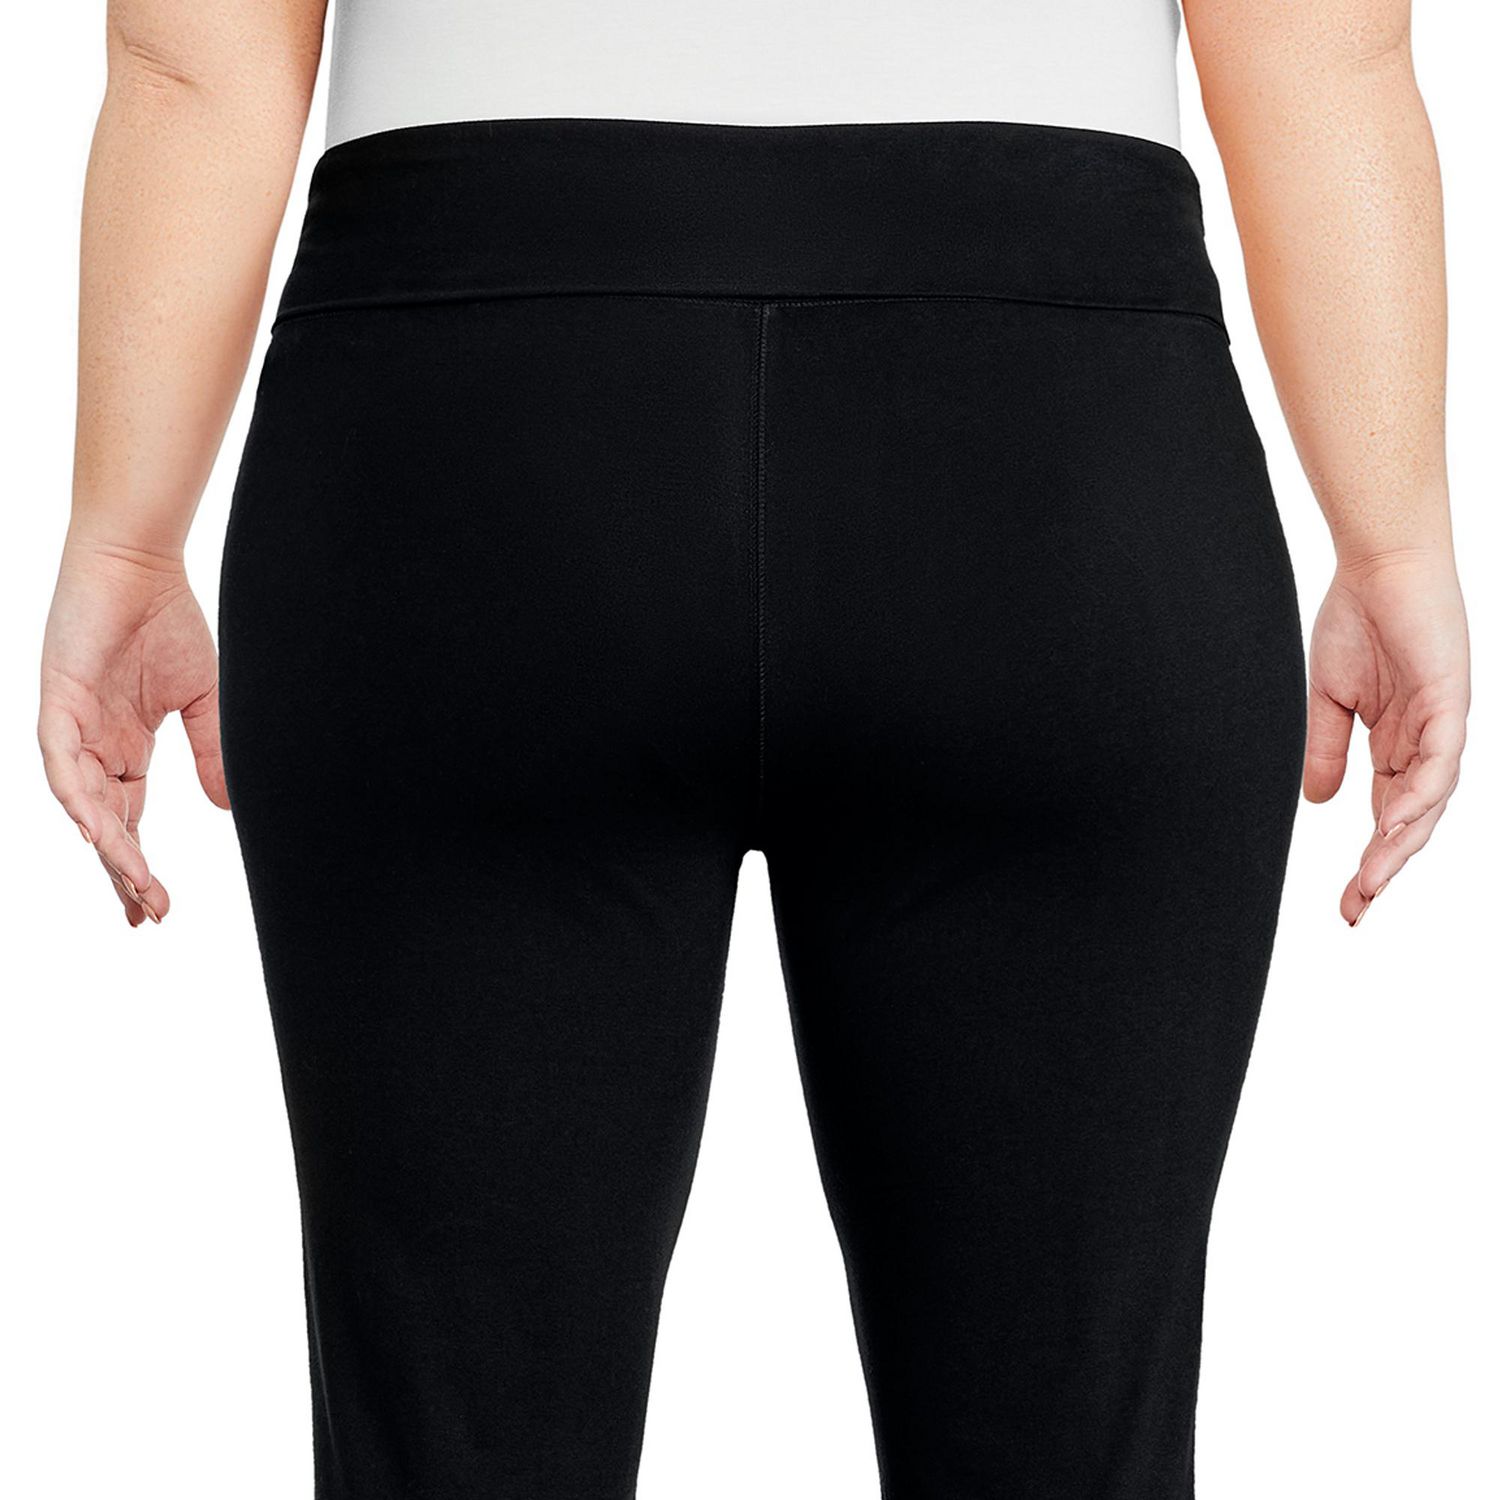 Just My Size Womens PlusSize Stretch Jersey Legging Black 1X   Amazonca Clothing Shoes  Accessories